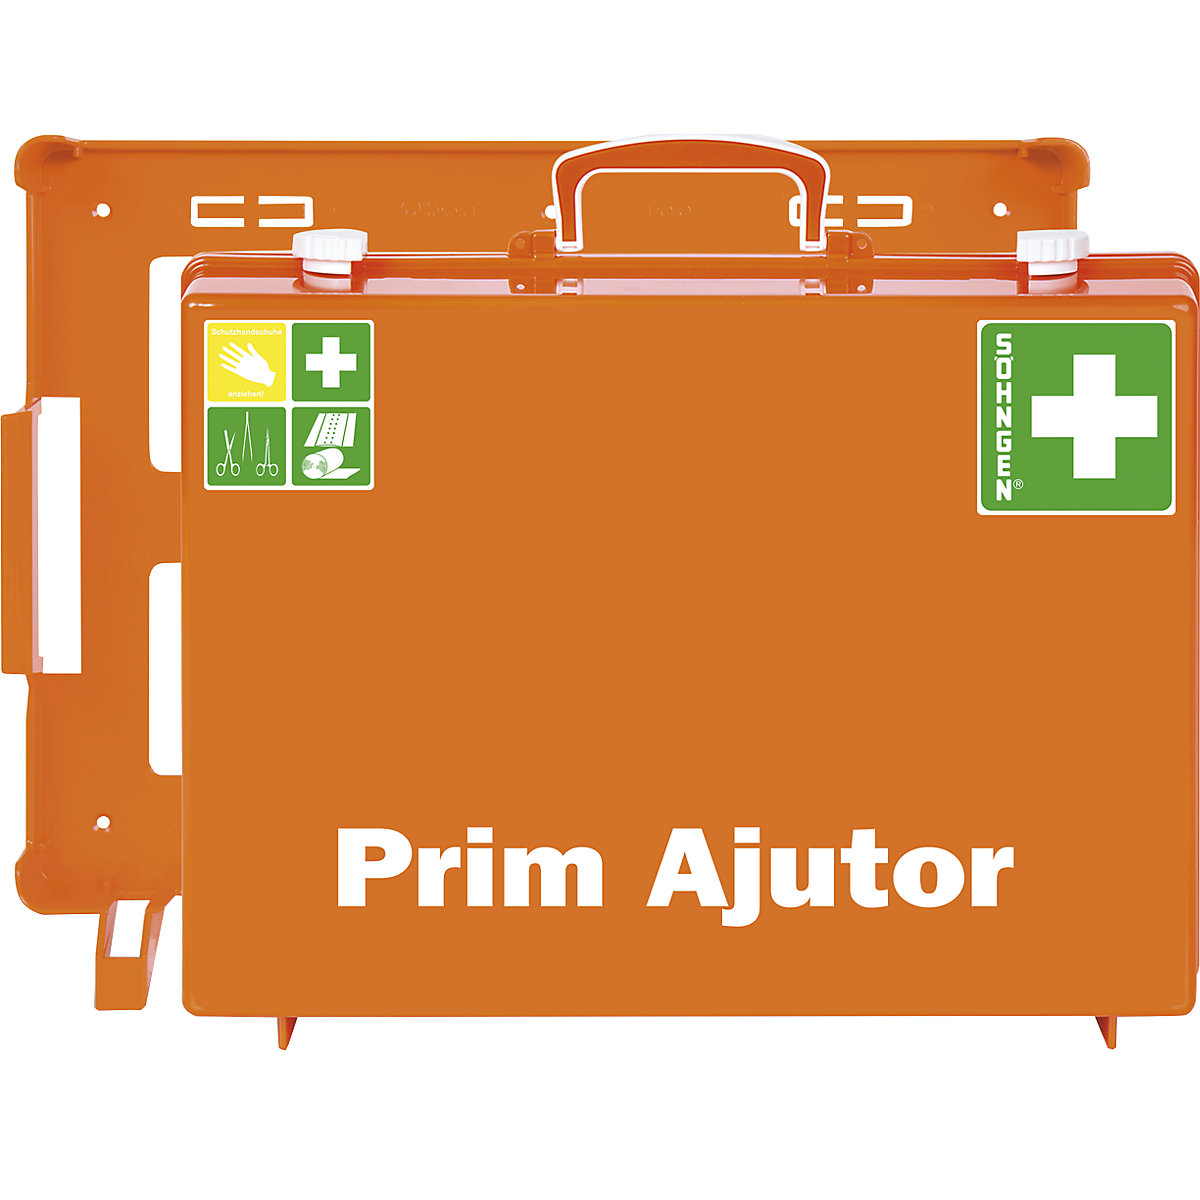 SÖHNGEN – First aid case, DIN 13169 compliant (Product illustration 14)